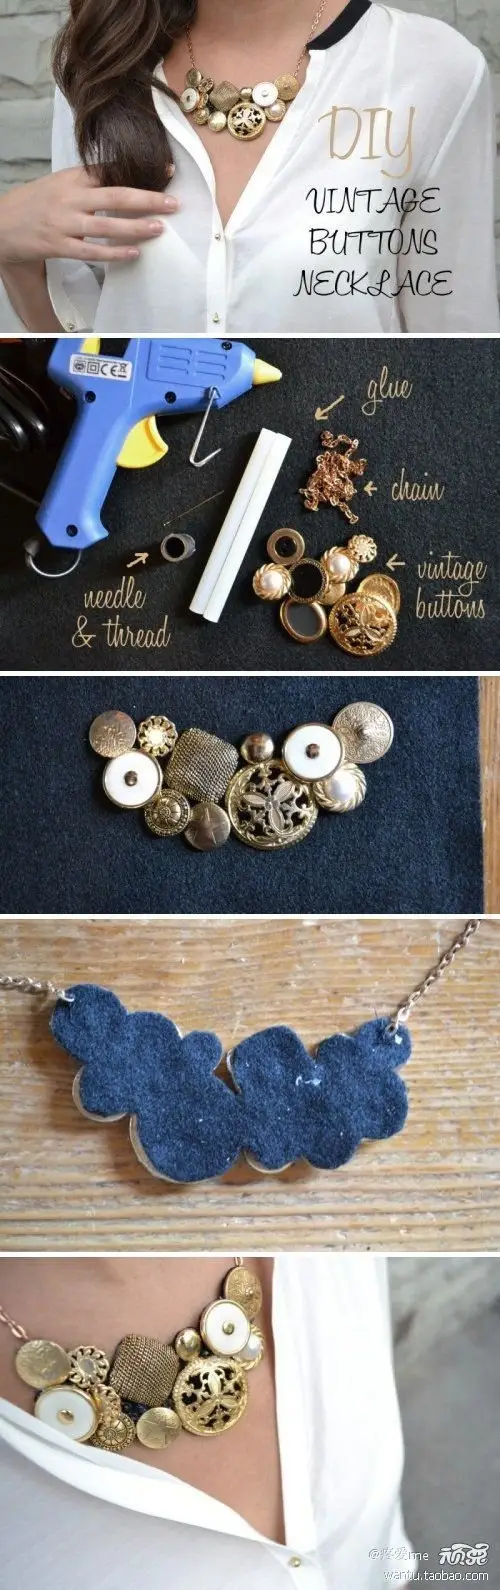 Crafts Made with Buttons, Upcycle Art